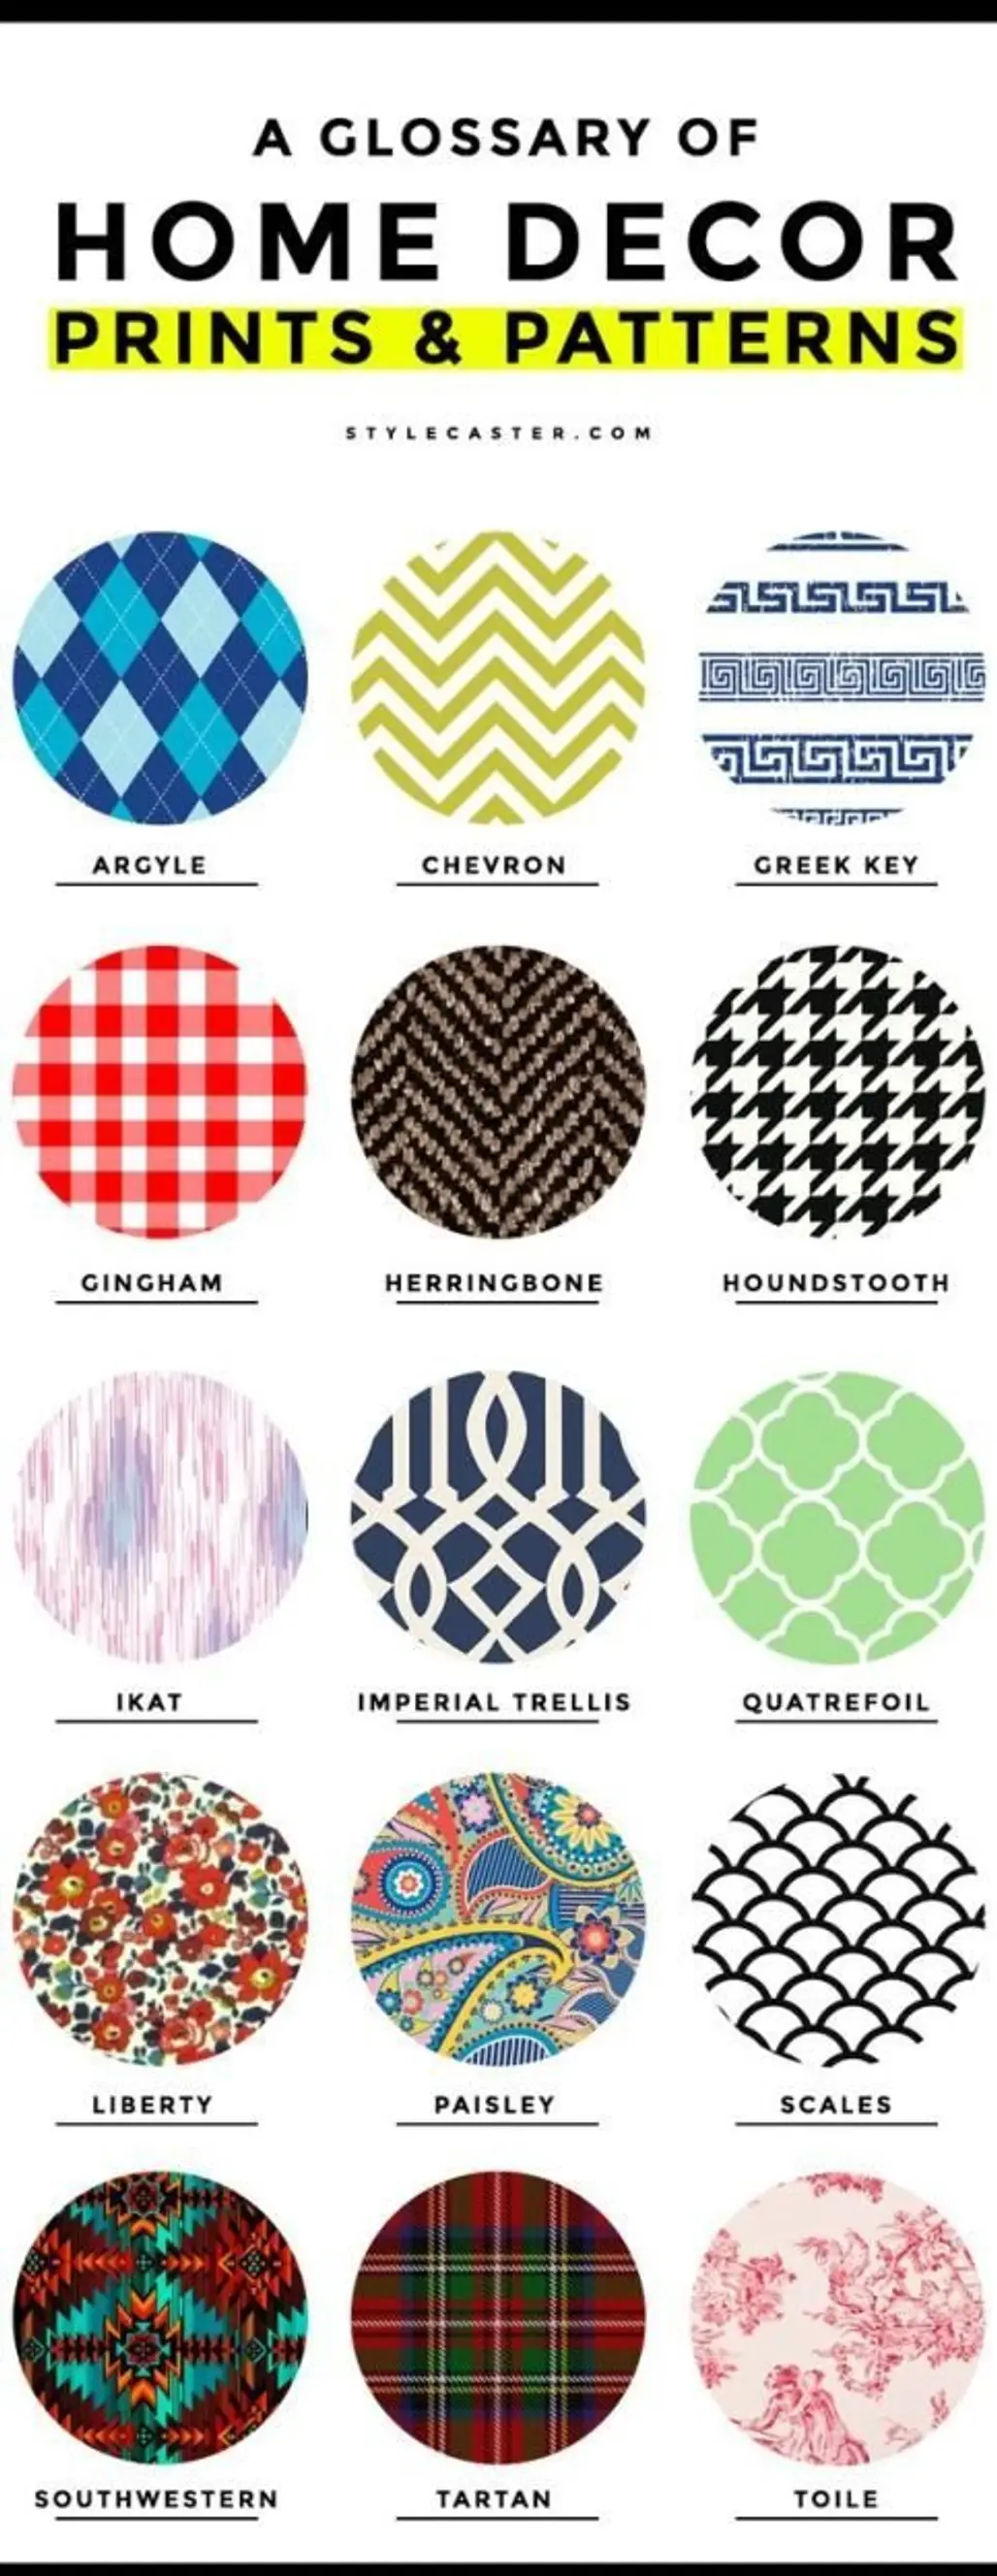 15 Common Home Decor Prints and Patterns